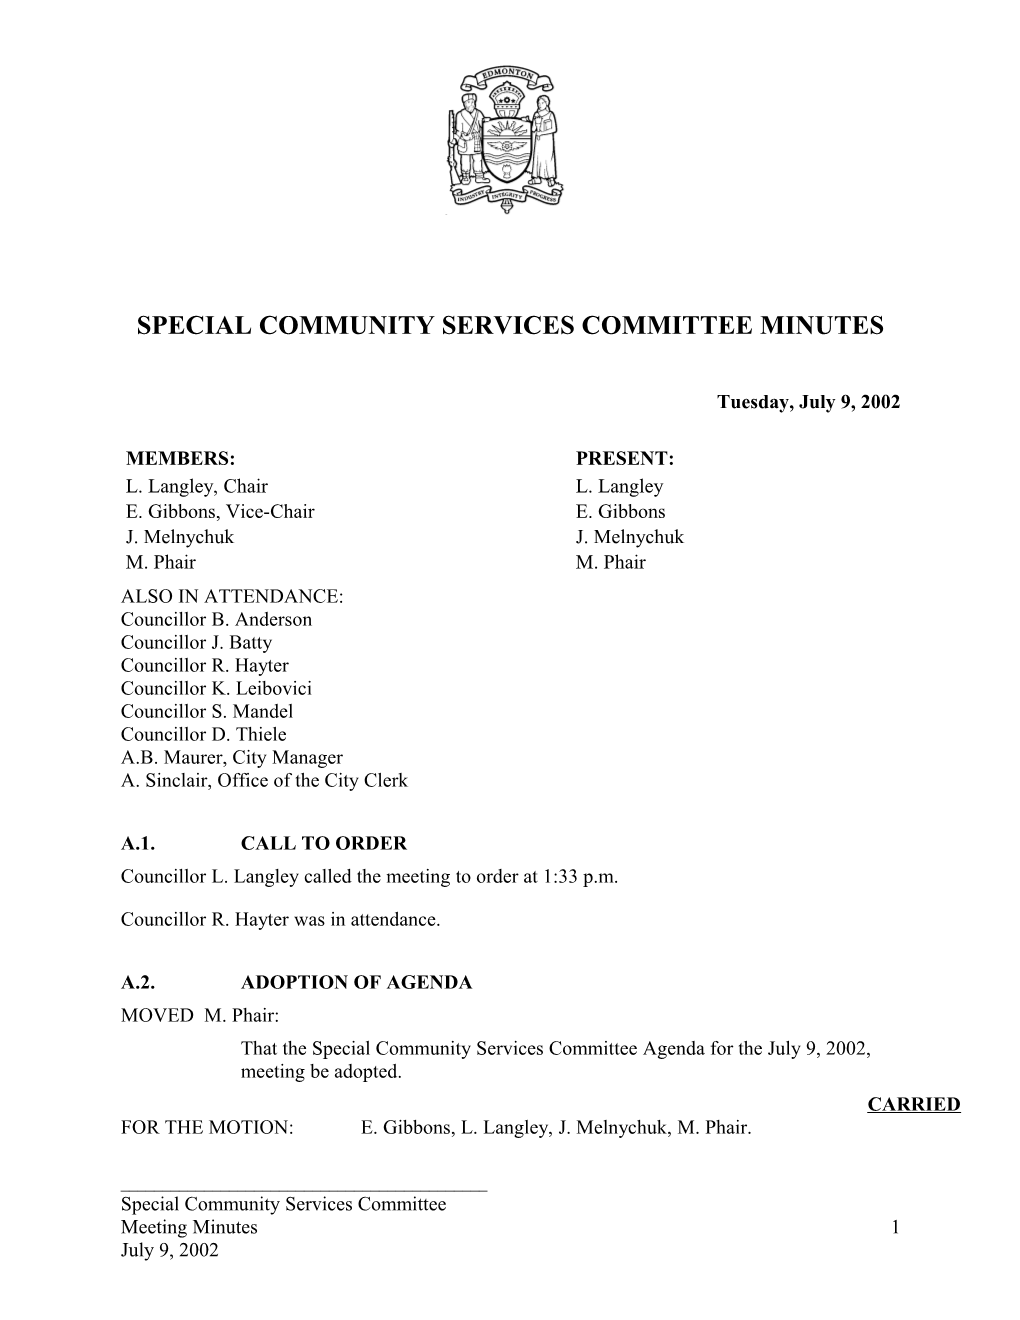 Minutes for Community Services Committee July 9, 2002 Meeting